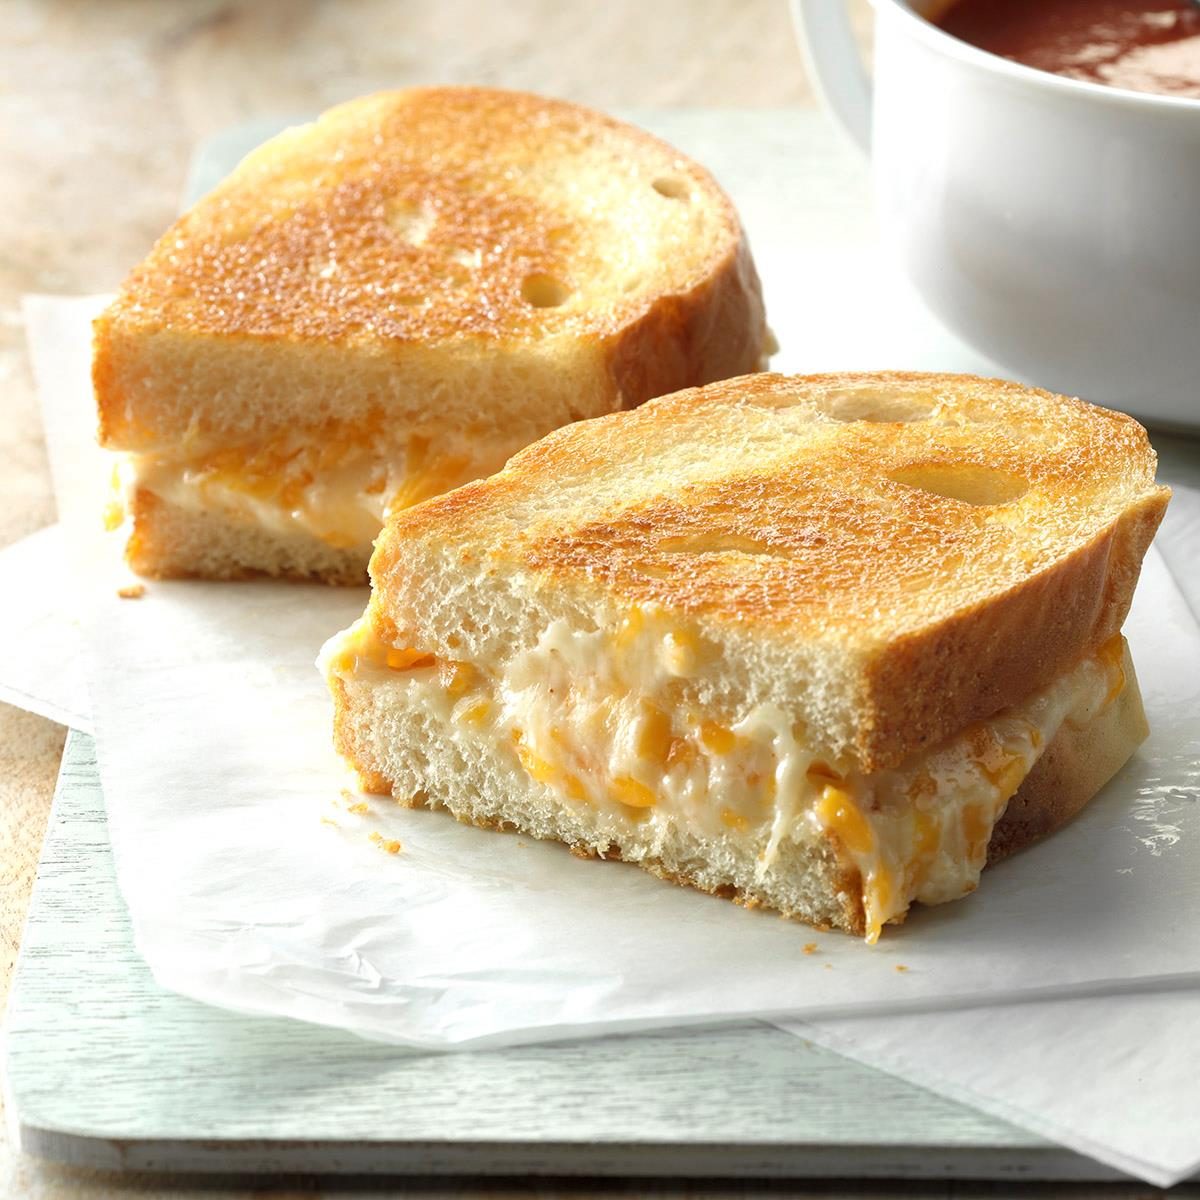 Inspired by: Classic Grilled Cheese